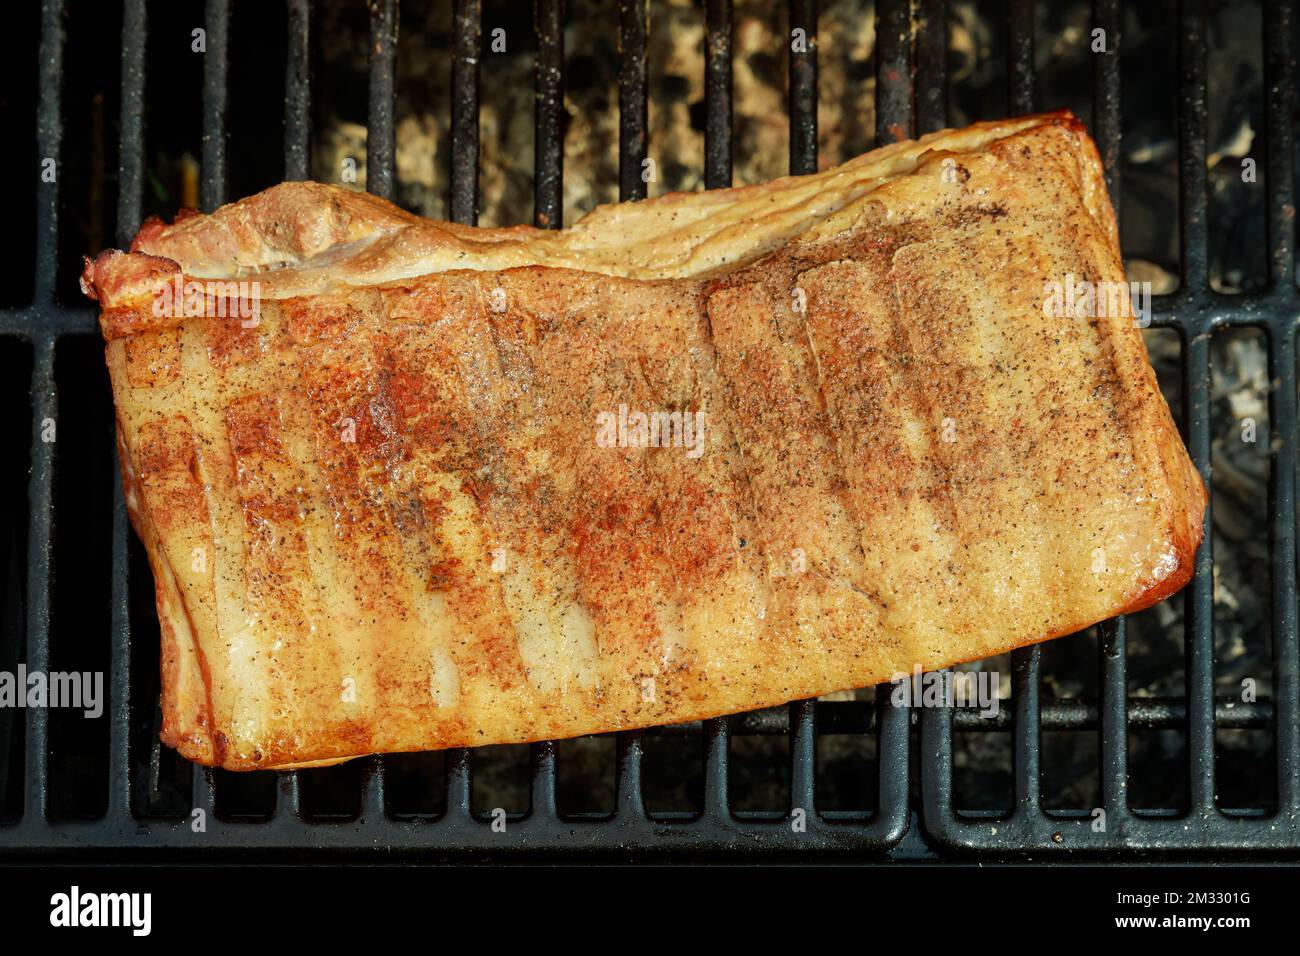 Roasted smoked whole bacon cooked on BBQ grill in traditional way Stock Photo